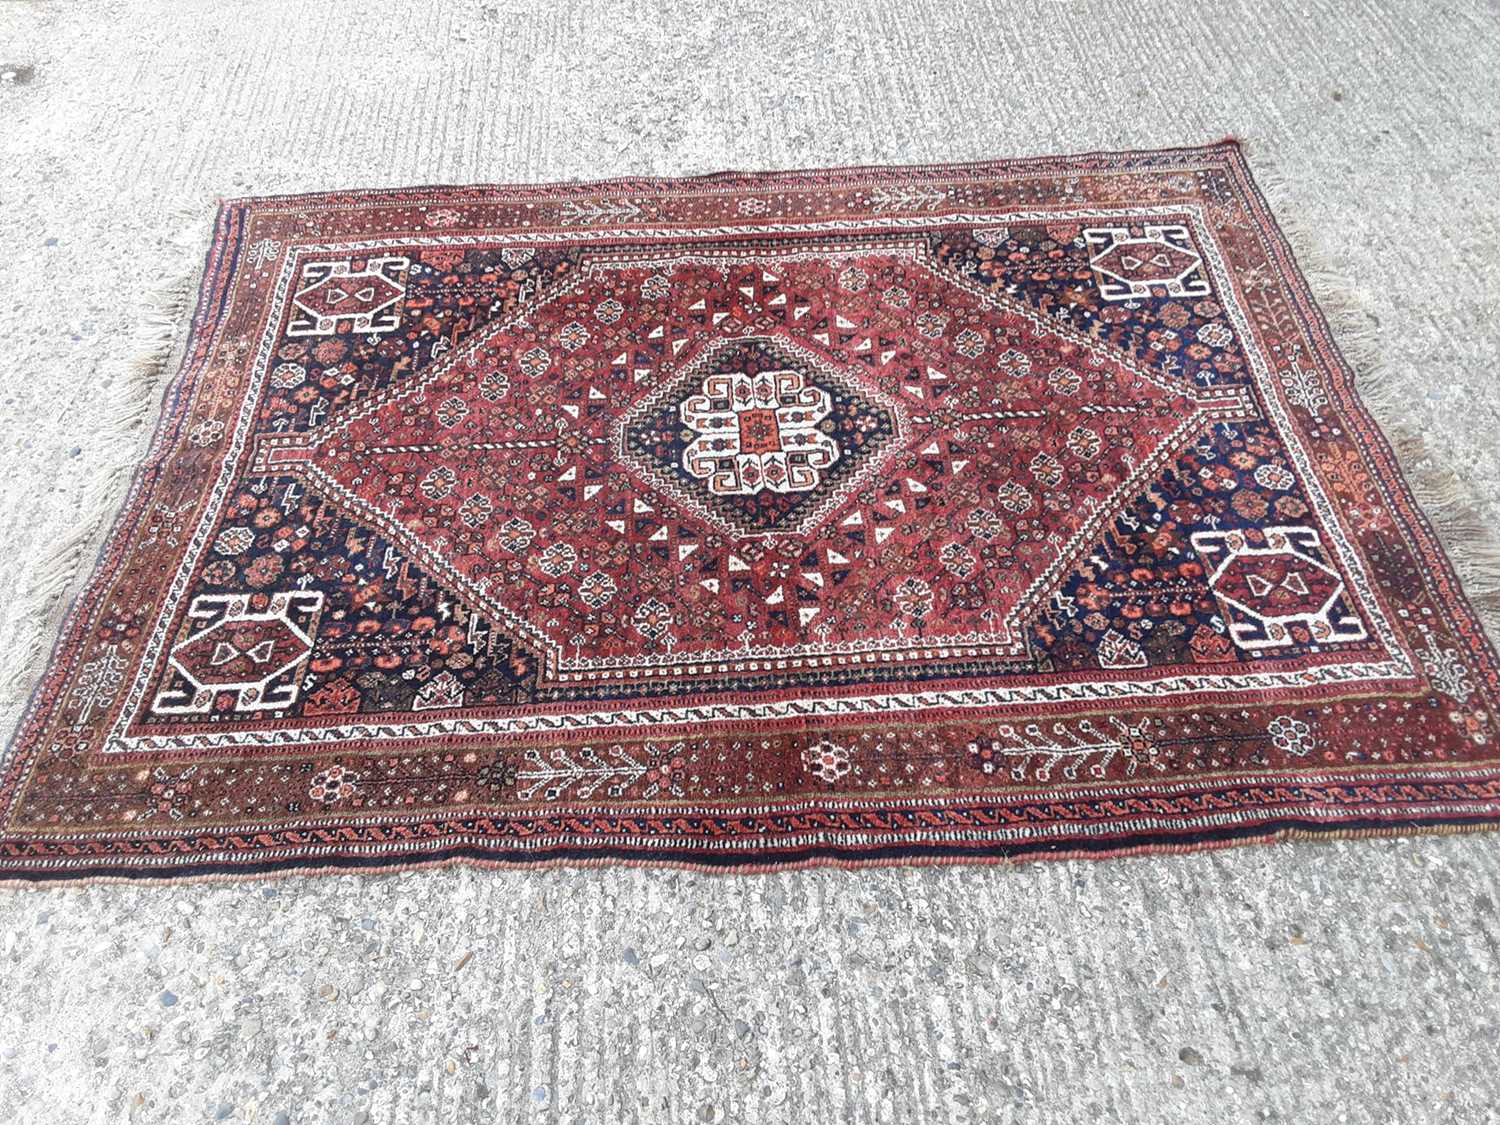 Lot 394 - Eastern rug with geometric decoration on red and blue ground, 199cm x 148cm